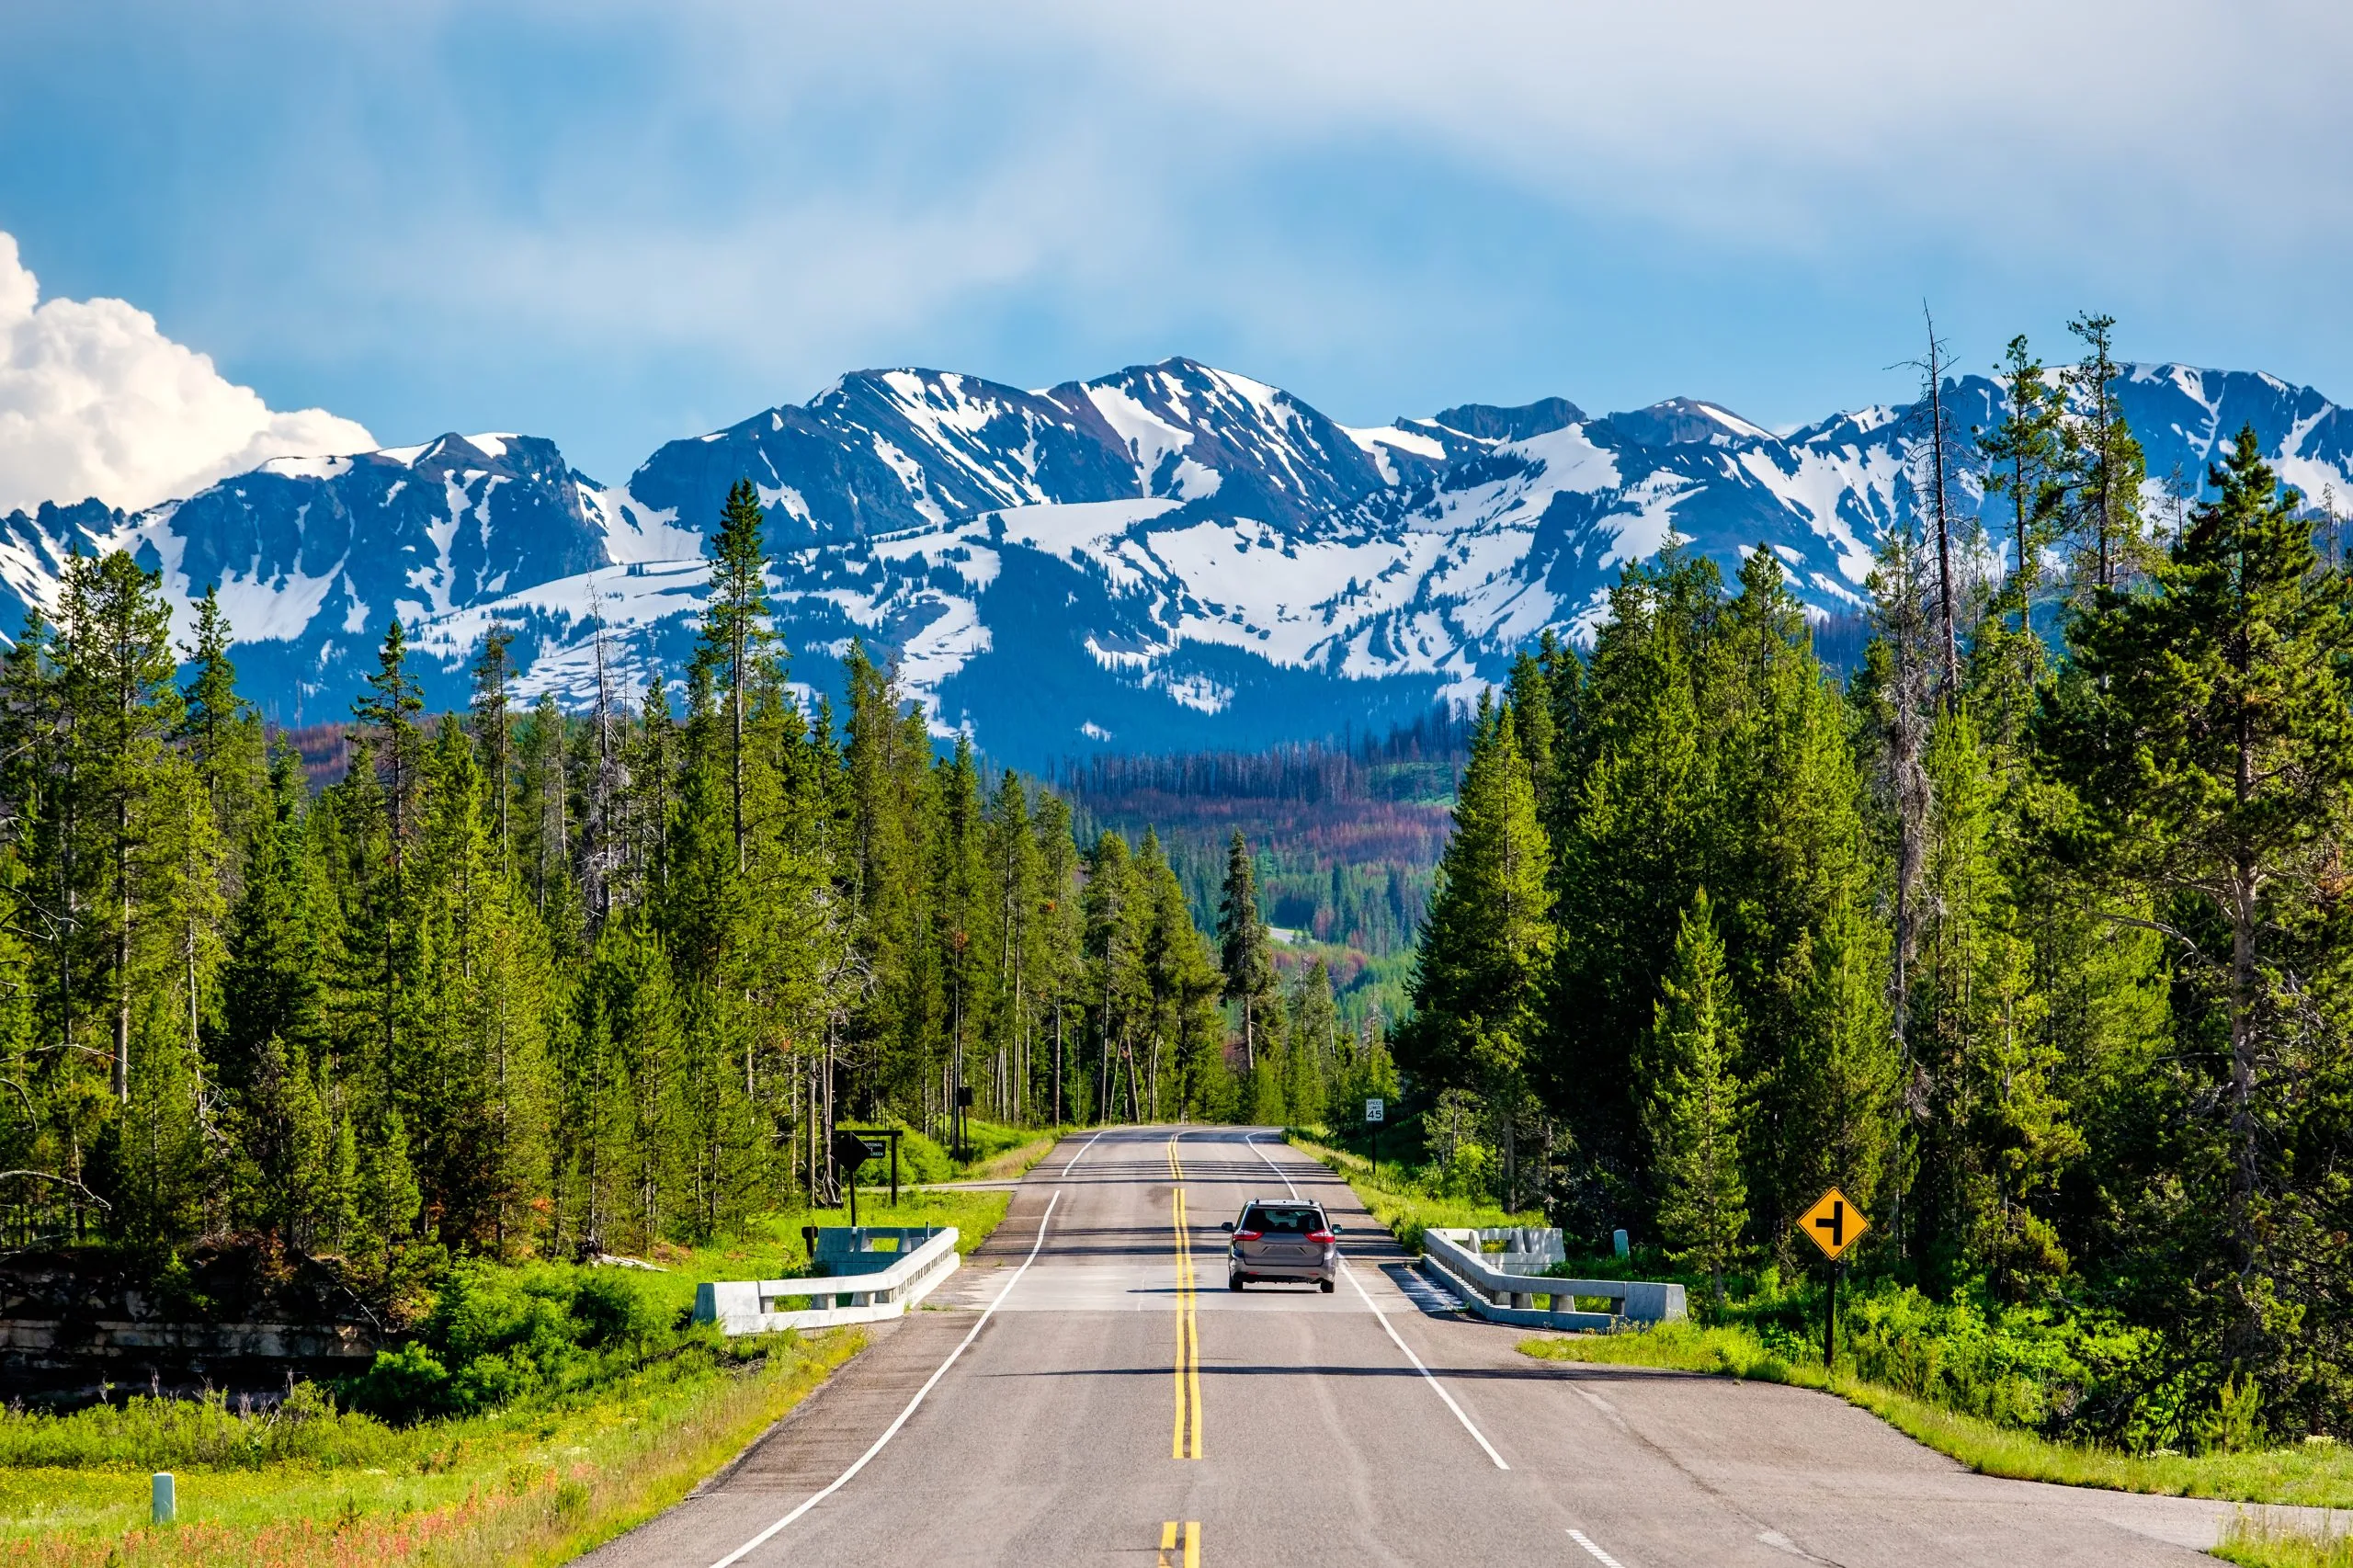 Road to Grand Tetons from Yellowstone with mountains visible in the distance, one of the best road trips in USA